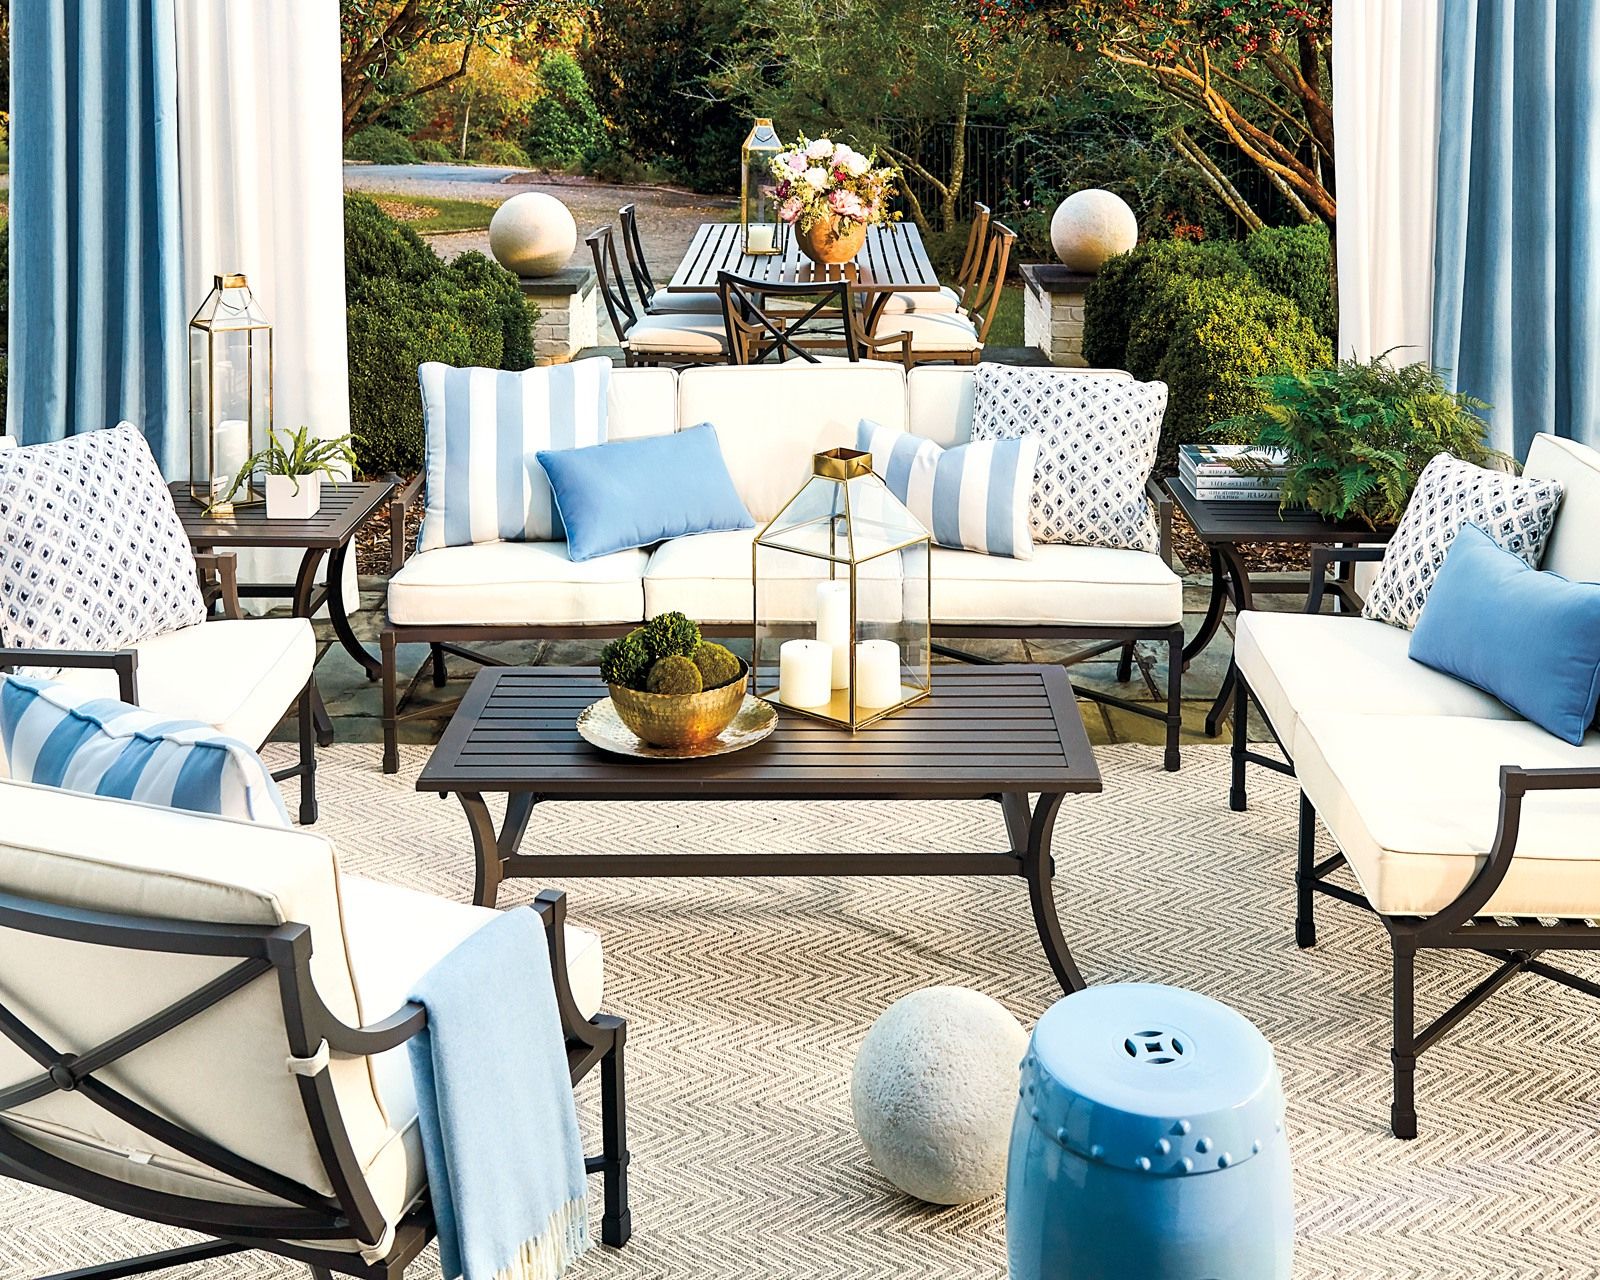 Fashionable Outdoor Furniture – 15 Ways To Arrange Your Porch With Loveseat Chairs For Backyard (View 13 of 15)